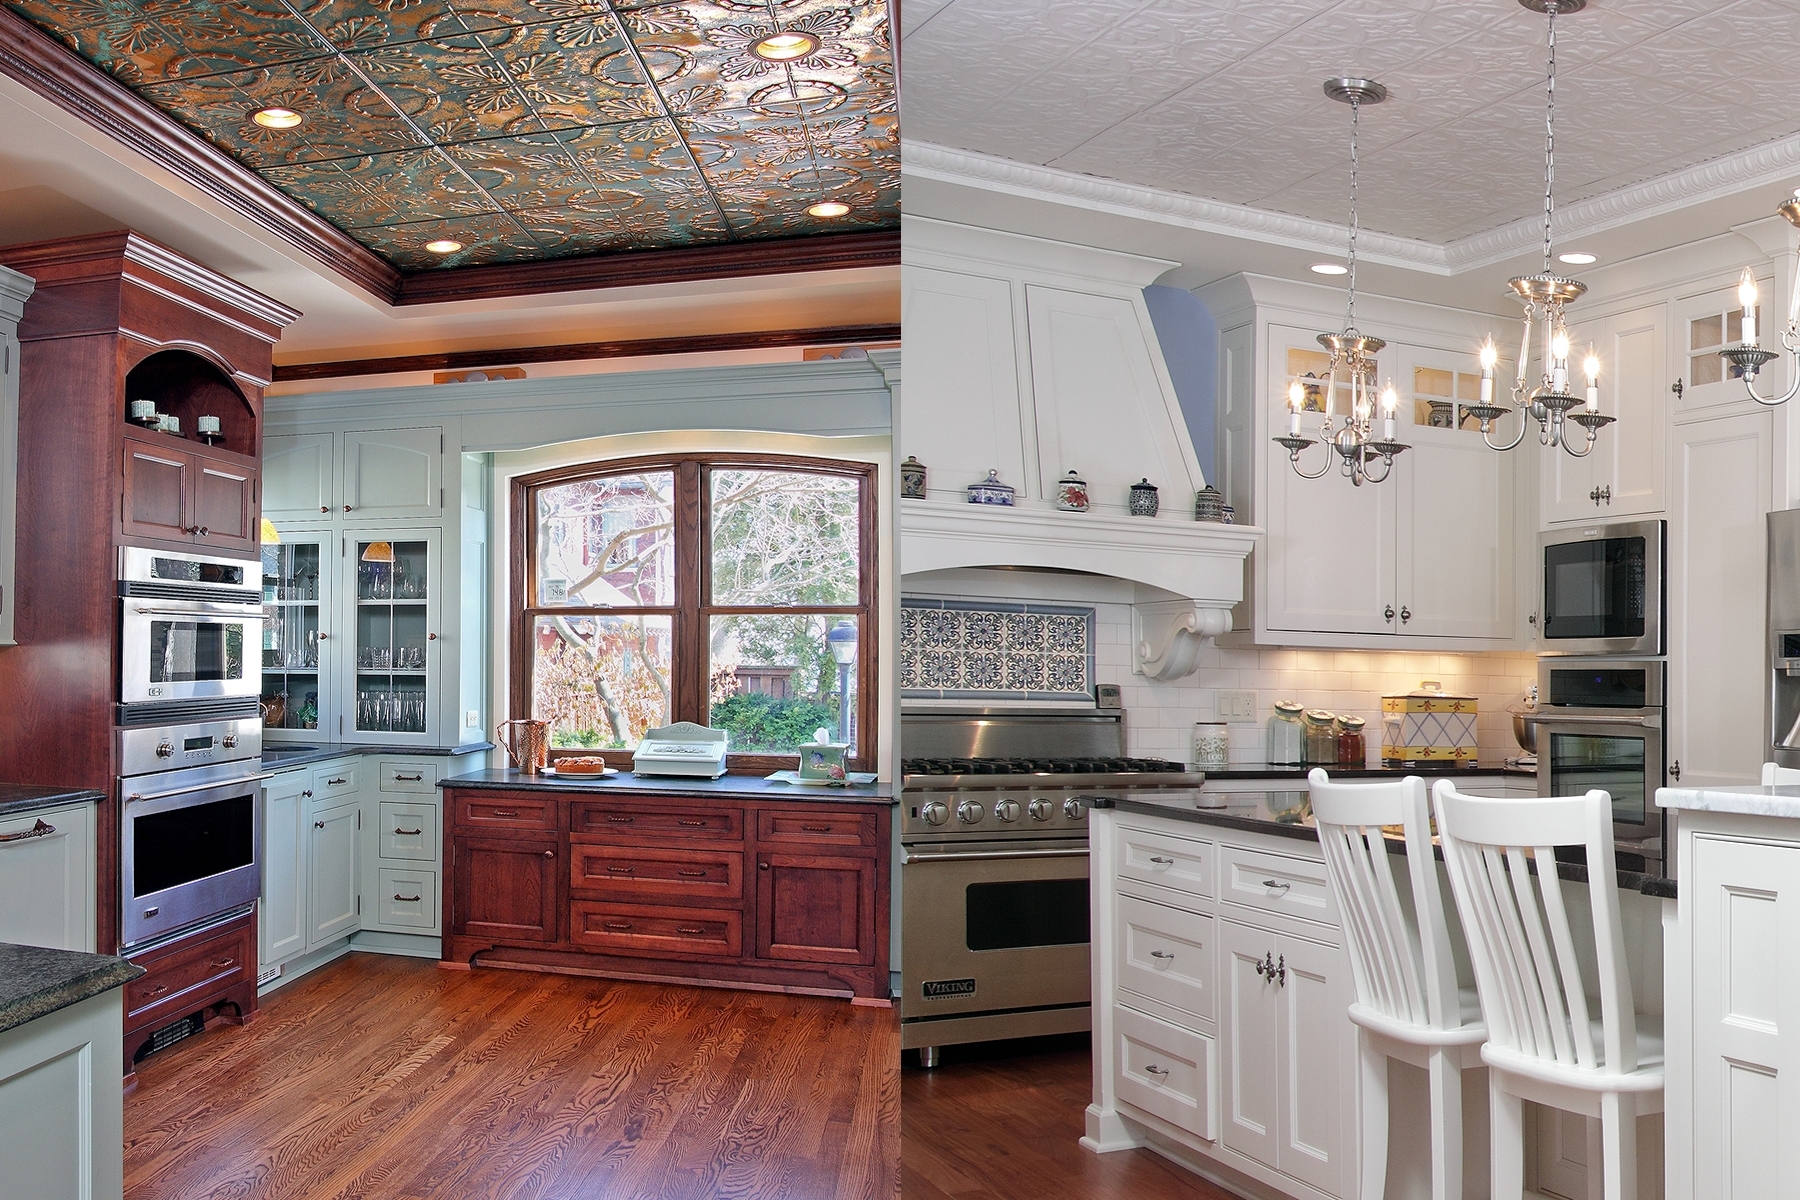 Permalink to Kitchen Ceiling Tile Ideas